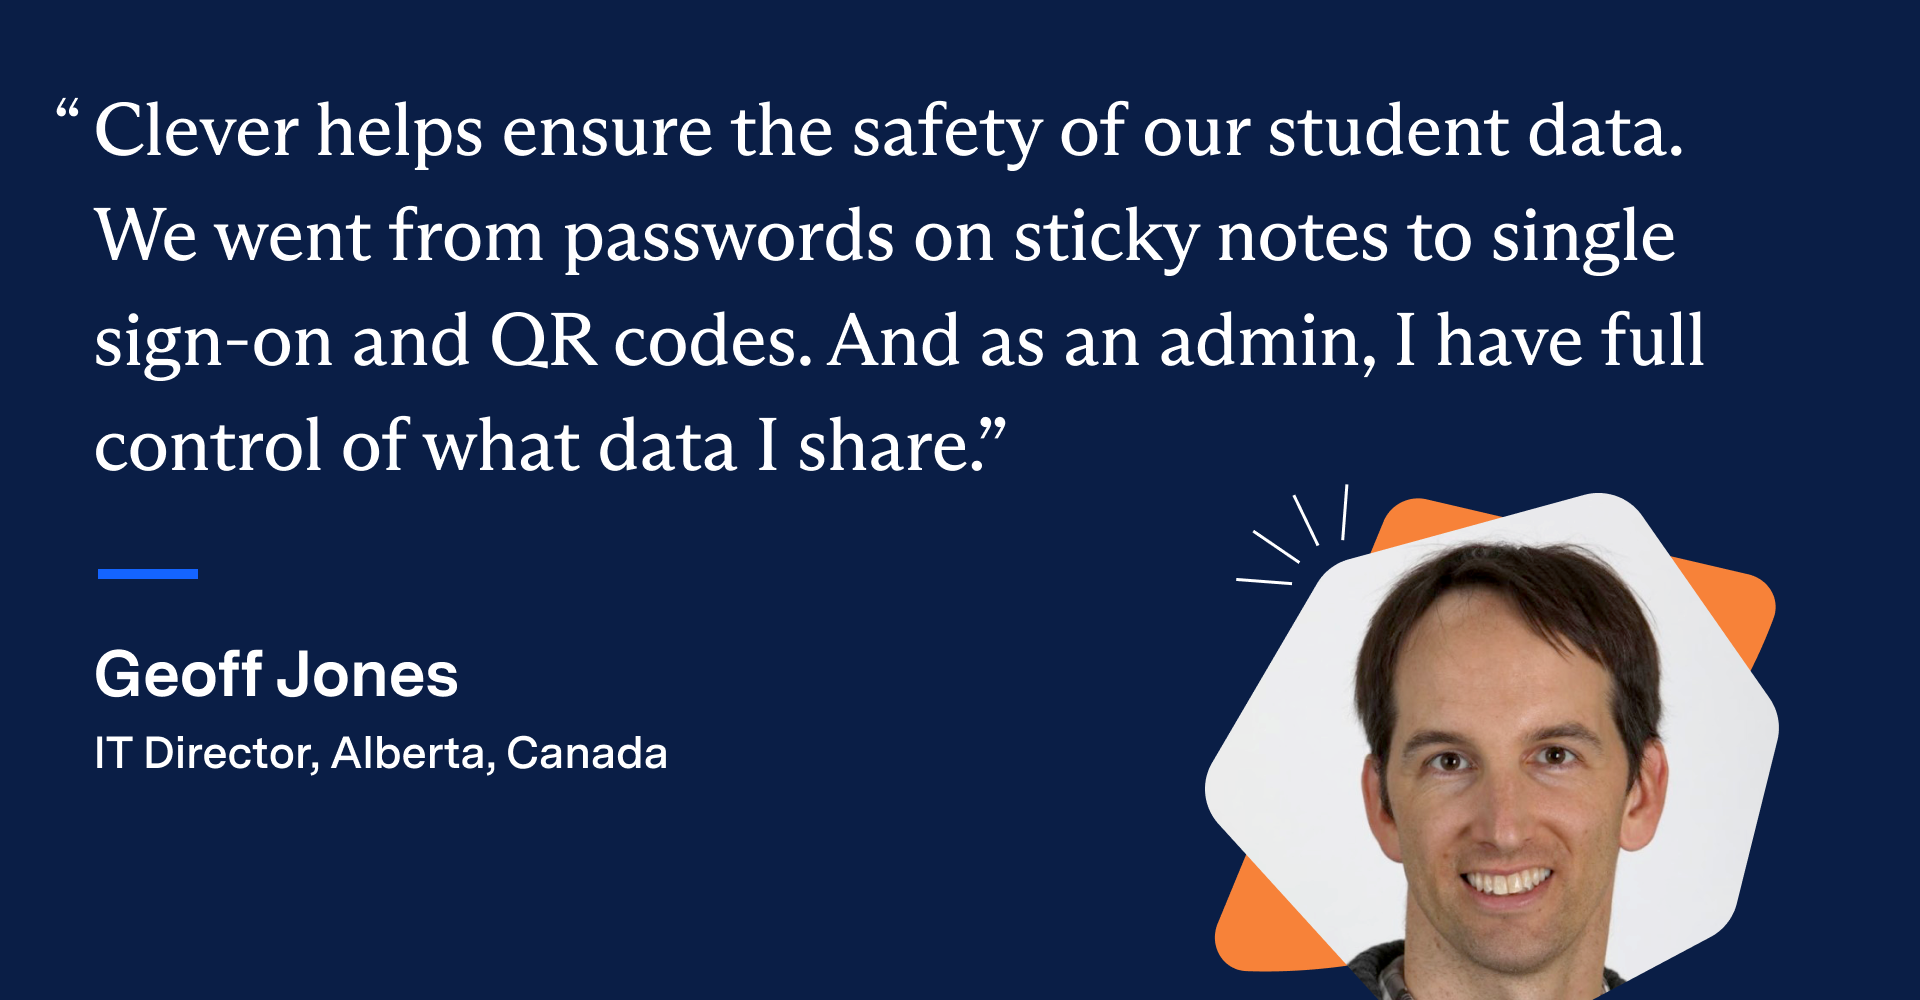 Image of Geoff Jones, IT Director from Alberta, Canada, with the quote: "Clever helps ensure the safety of our student data. We went from passwords on sticky notes to single sign-on and QR codes. And as an admin, I have full control of what data I share.” 